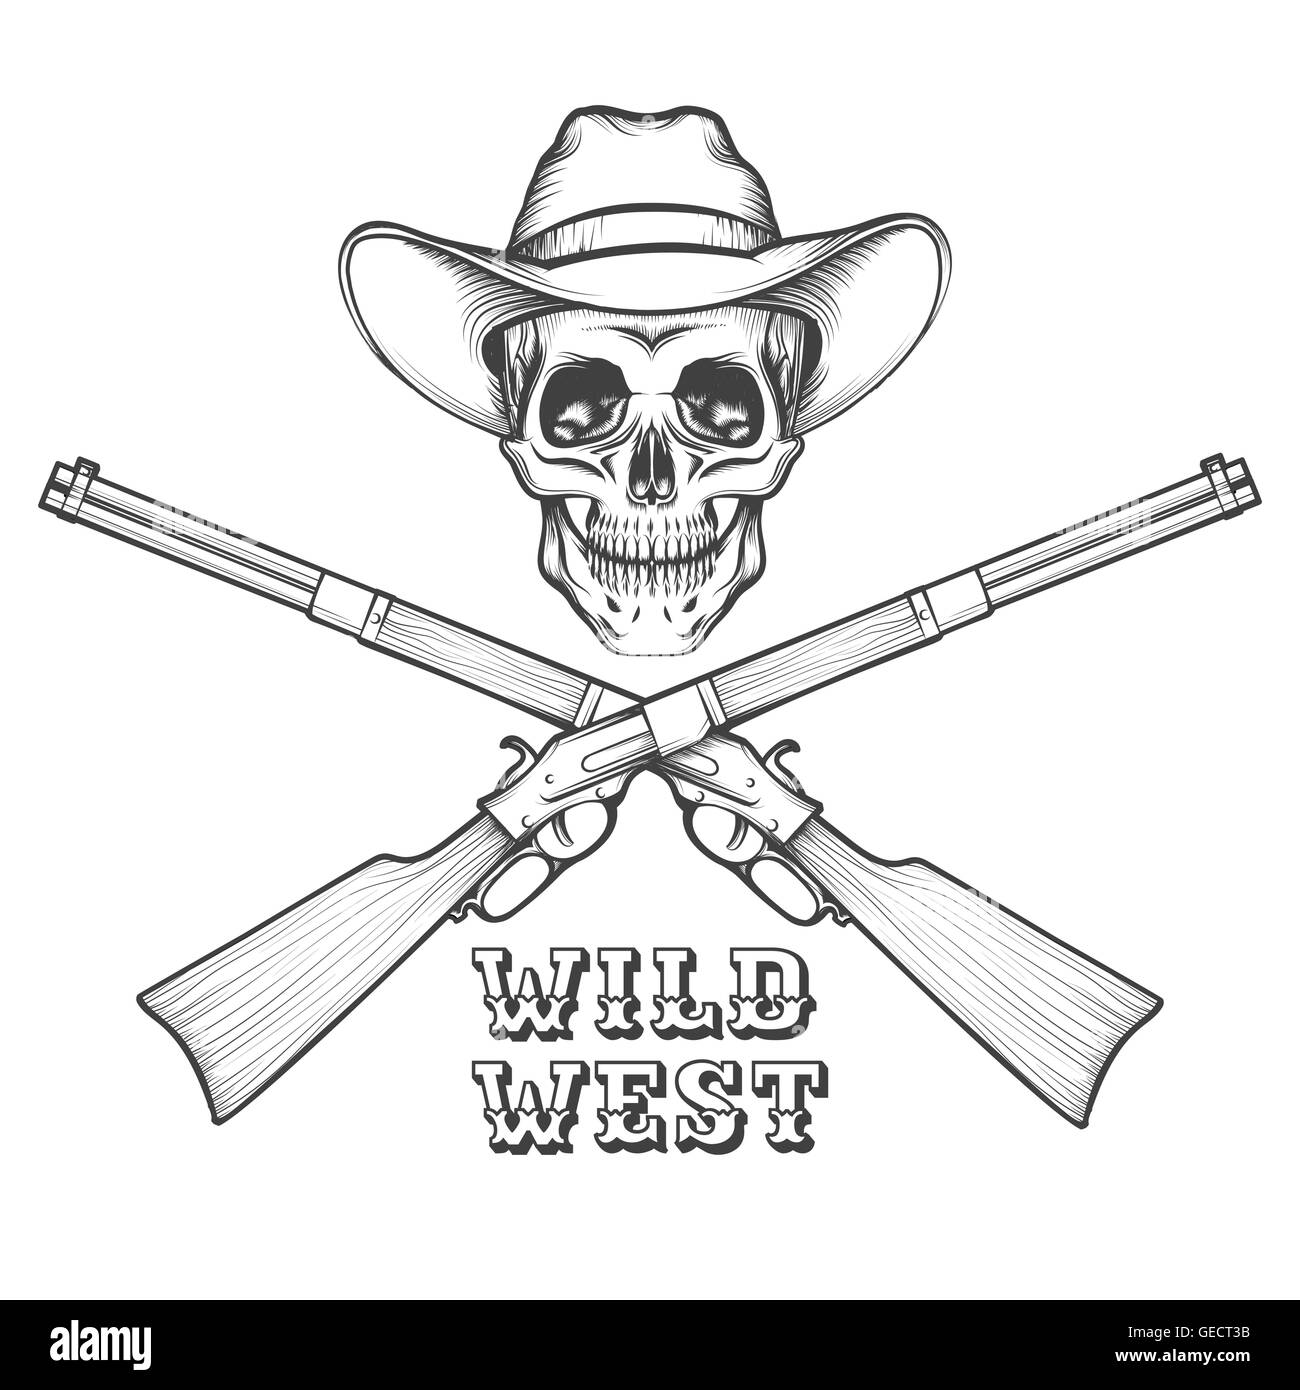 Skeleton in a cowboy hat with Old Rifles. illustration in engraving style. Stock Vector